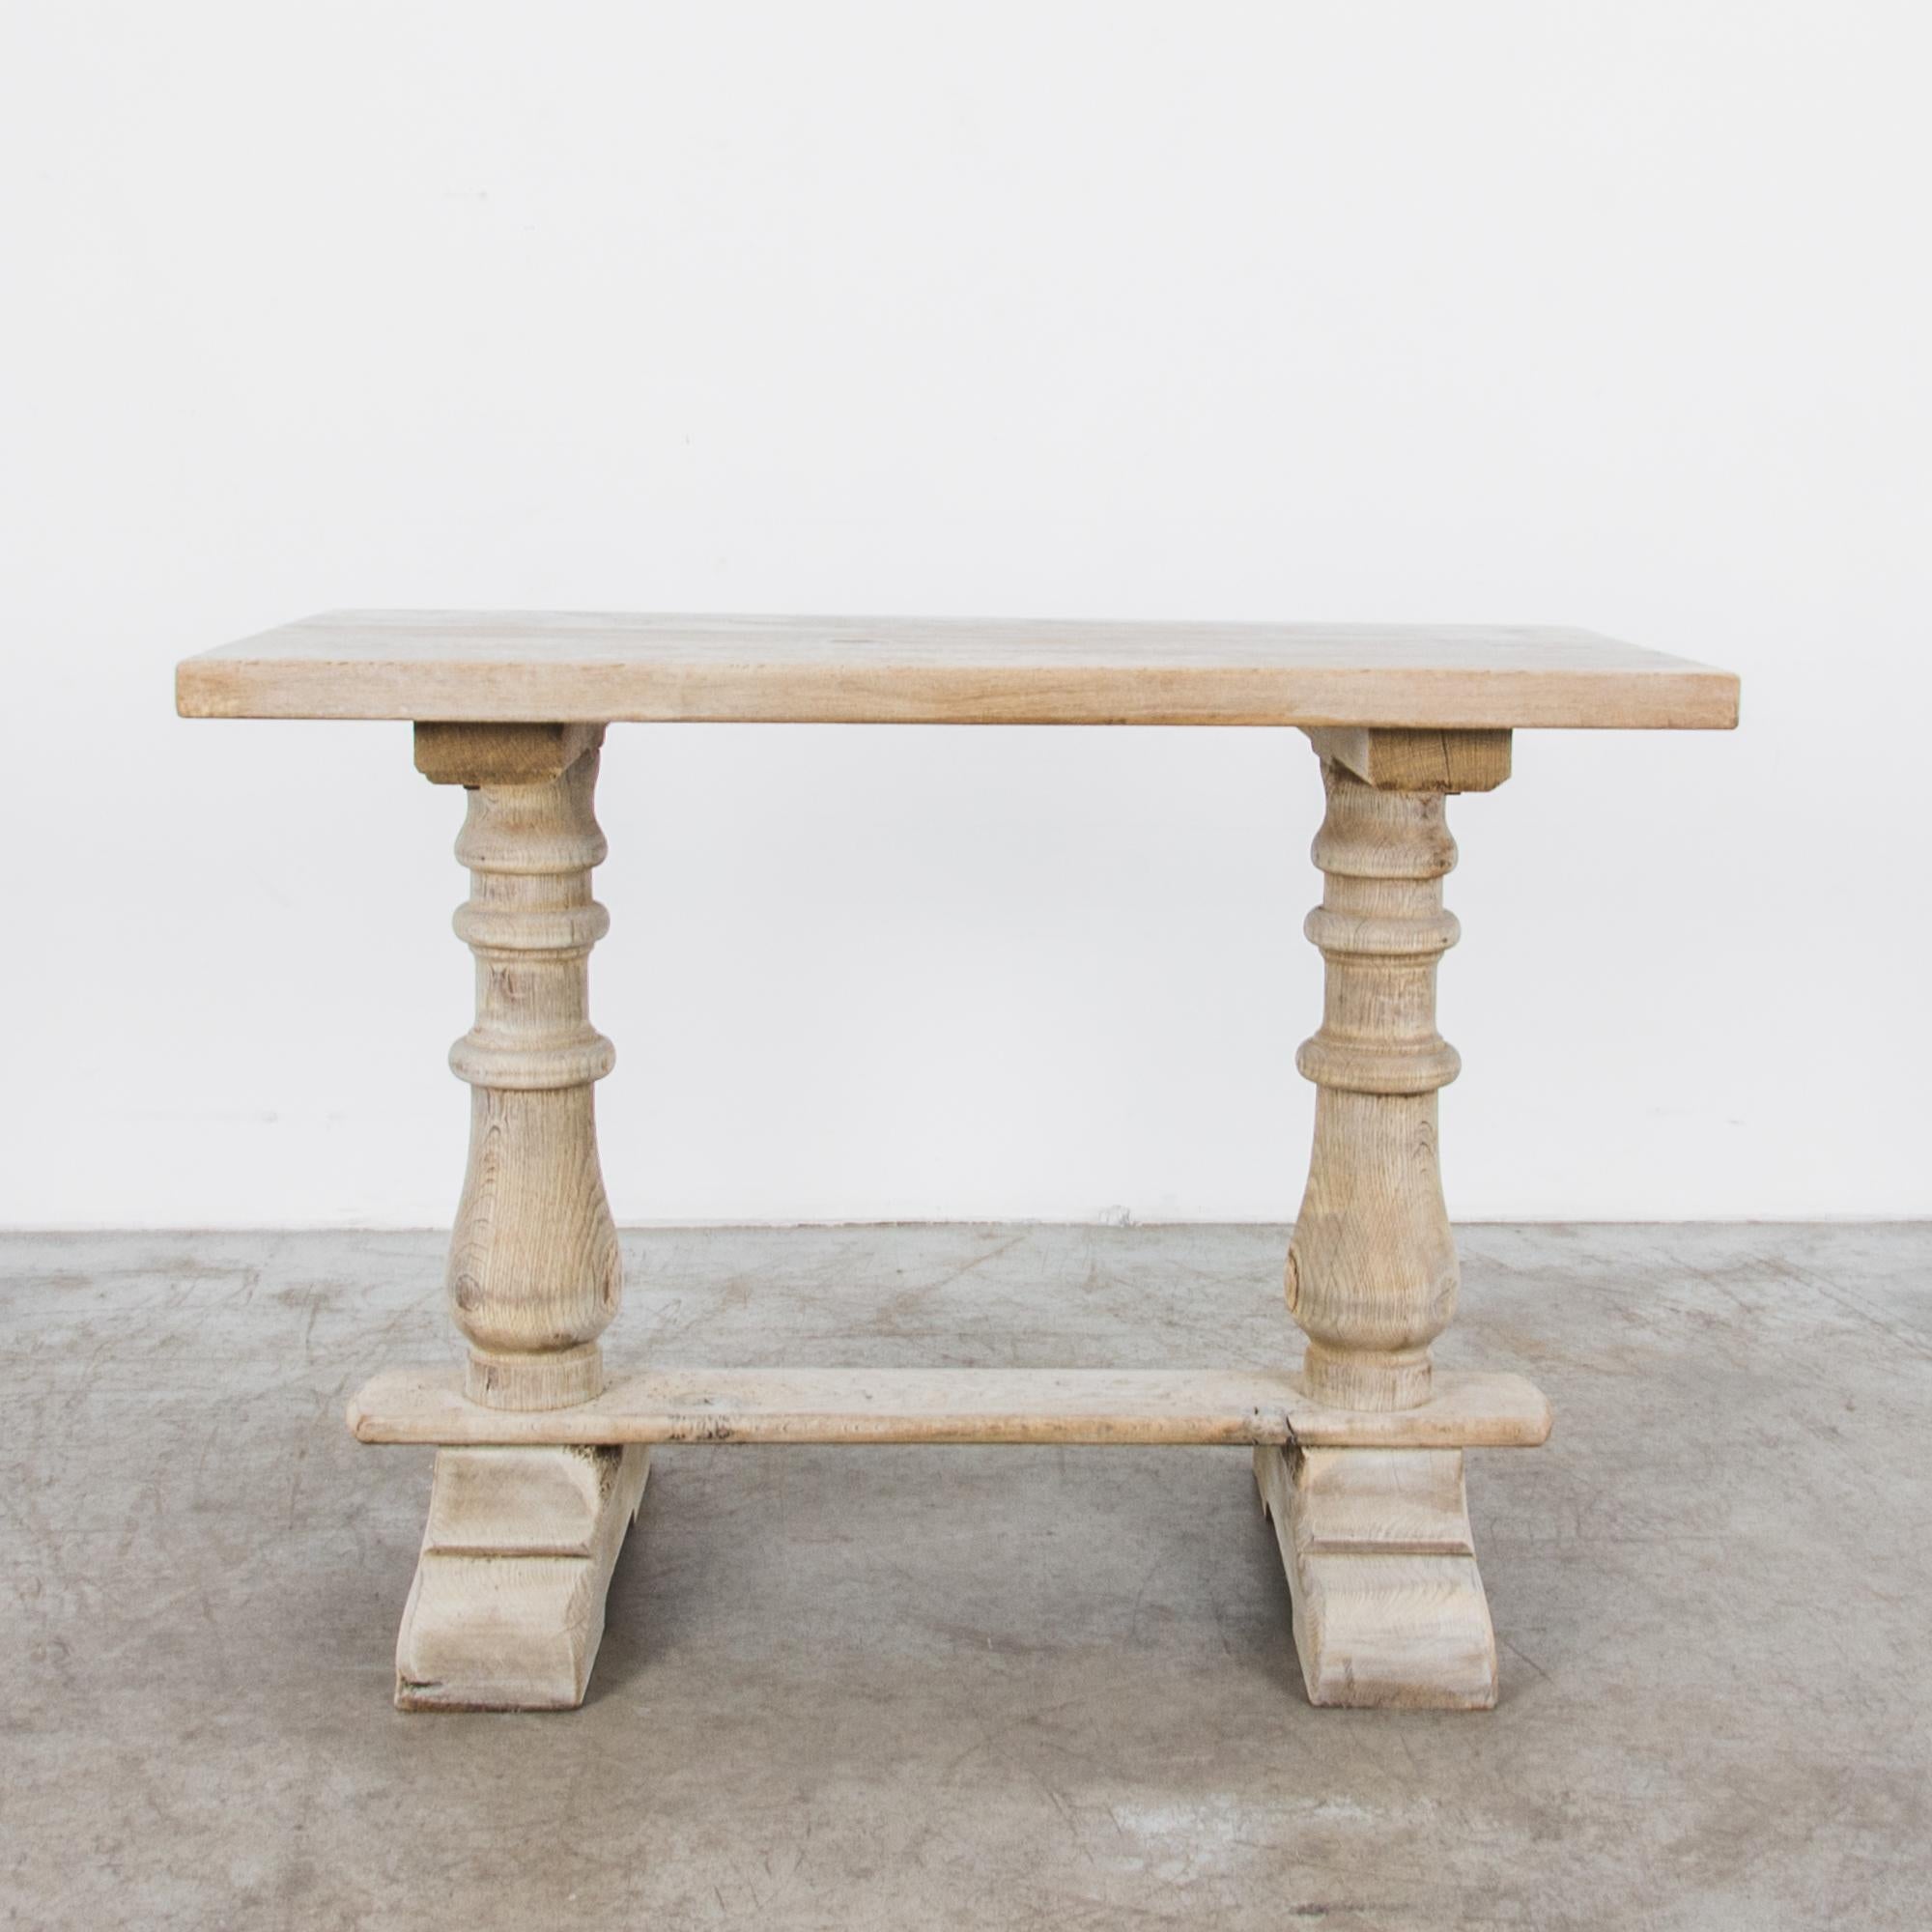 This oak trestle table was made in Belgium, circa 1950. Two sturdy turned oak legs joined by a stretcher support a simple tabletop, while a pair of sturdy scalloped braces elevate the whole. The wood has been restored to a bright bleached oak